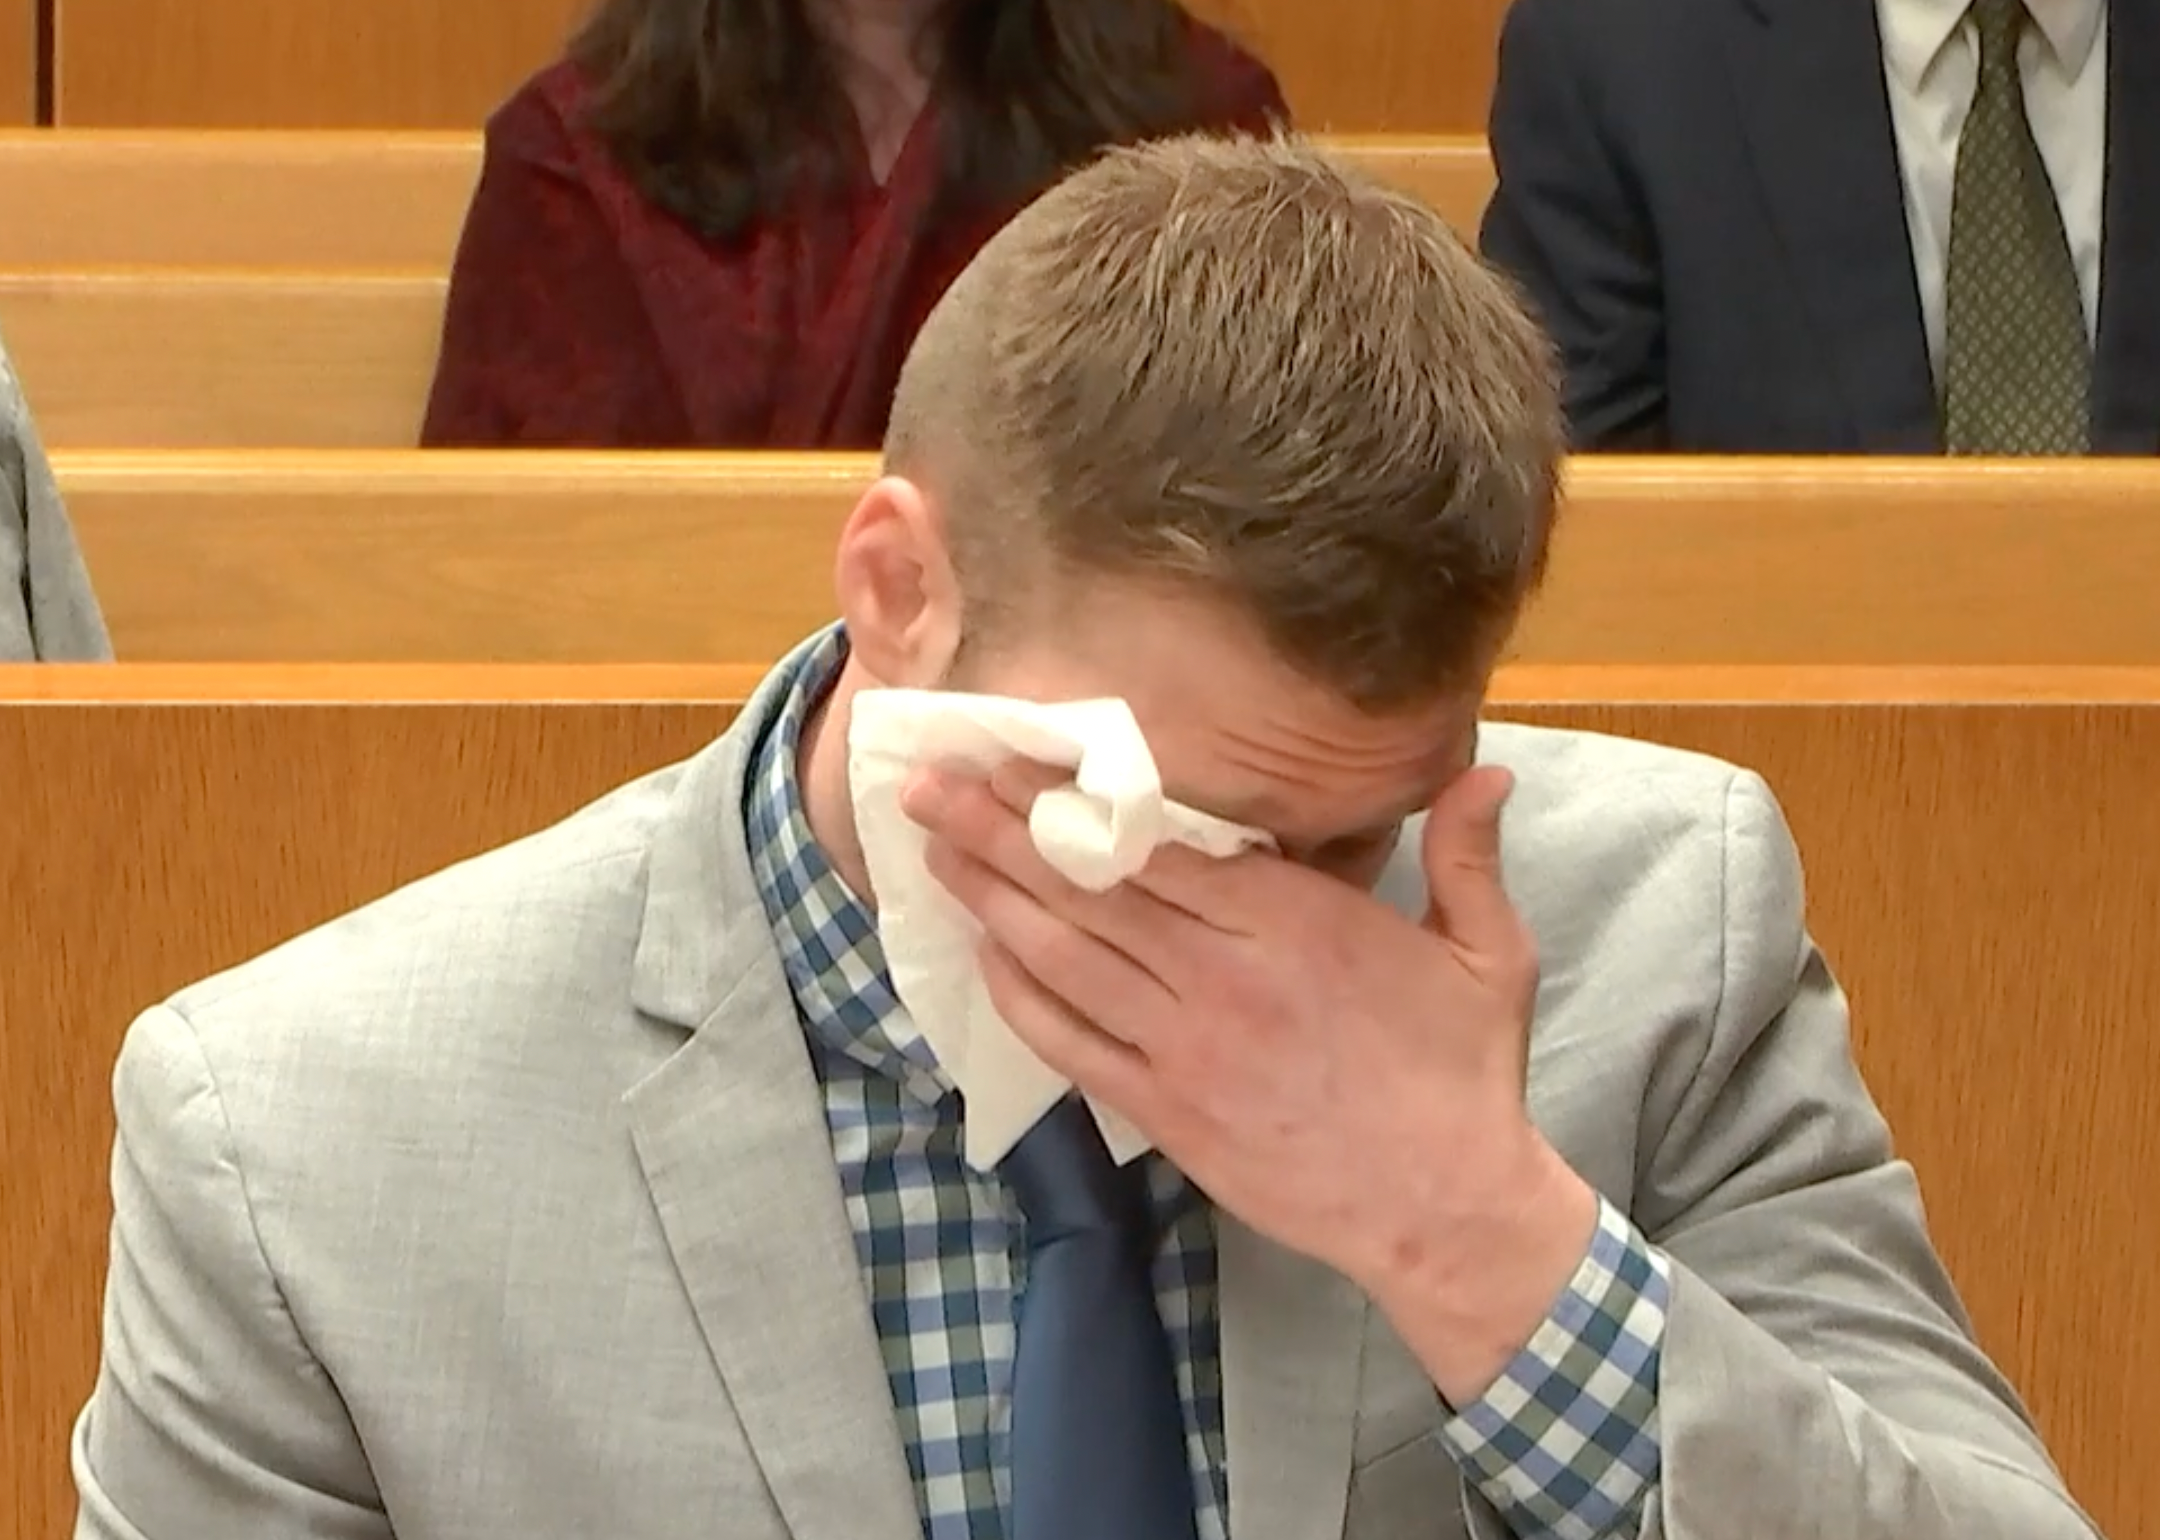 Mr Gregor breaks down in court while his mother is on the stand